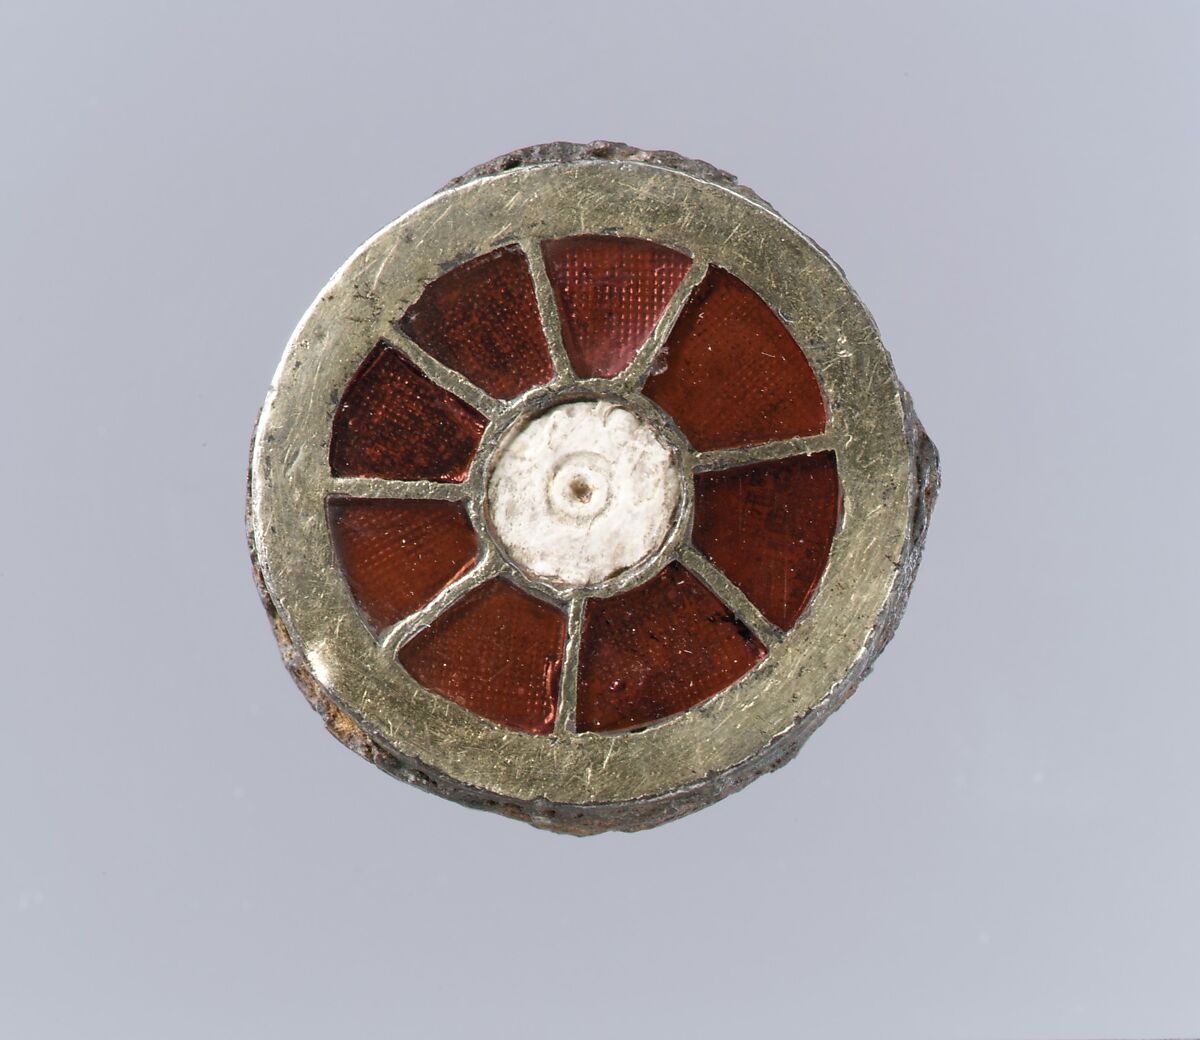 Disk Brooch, Silver-gilt on iron core, garnet, mother of pearl, Frankish 